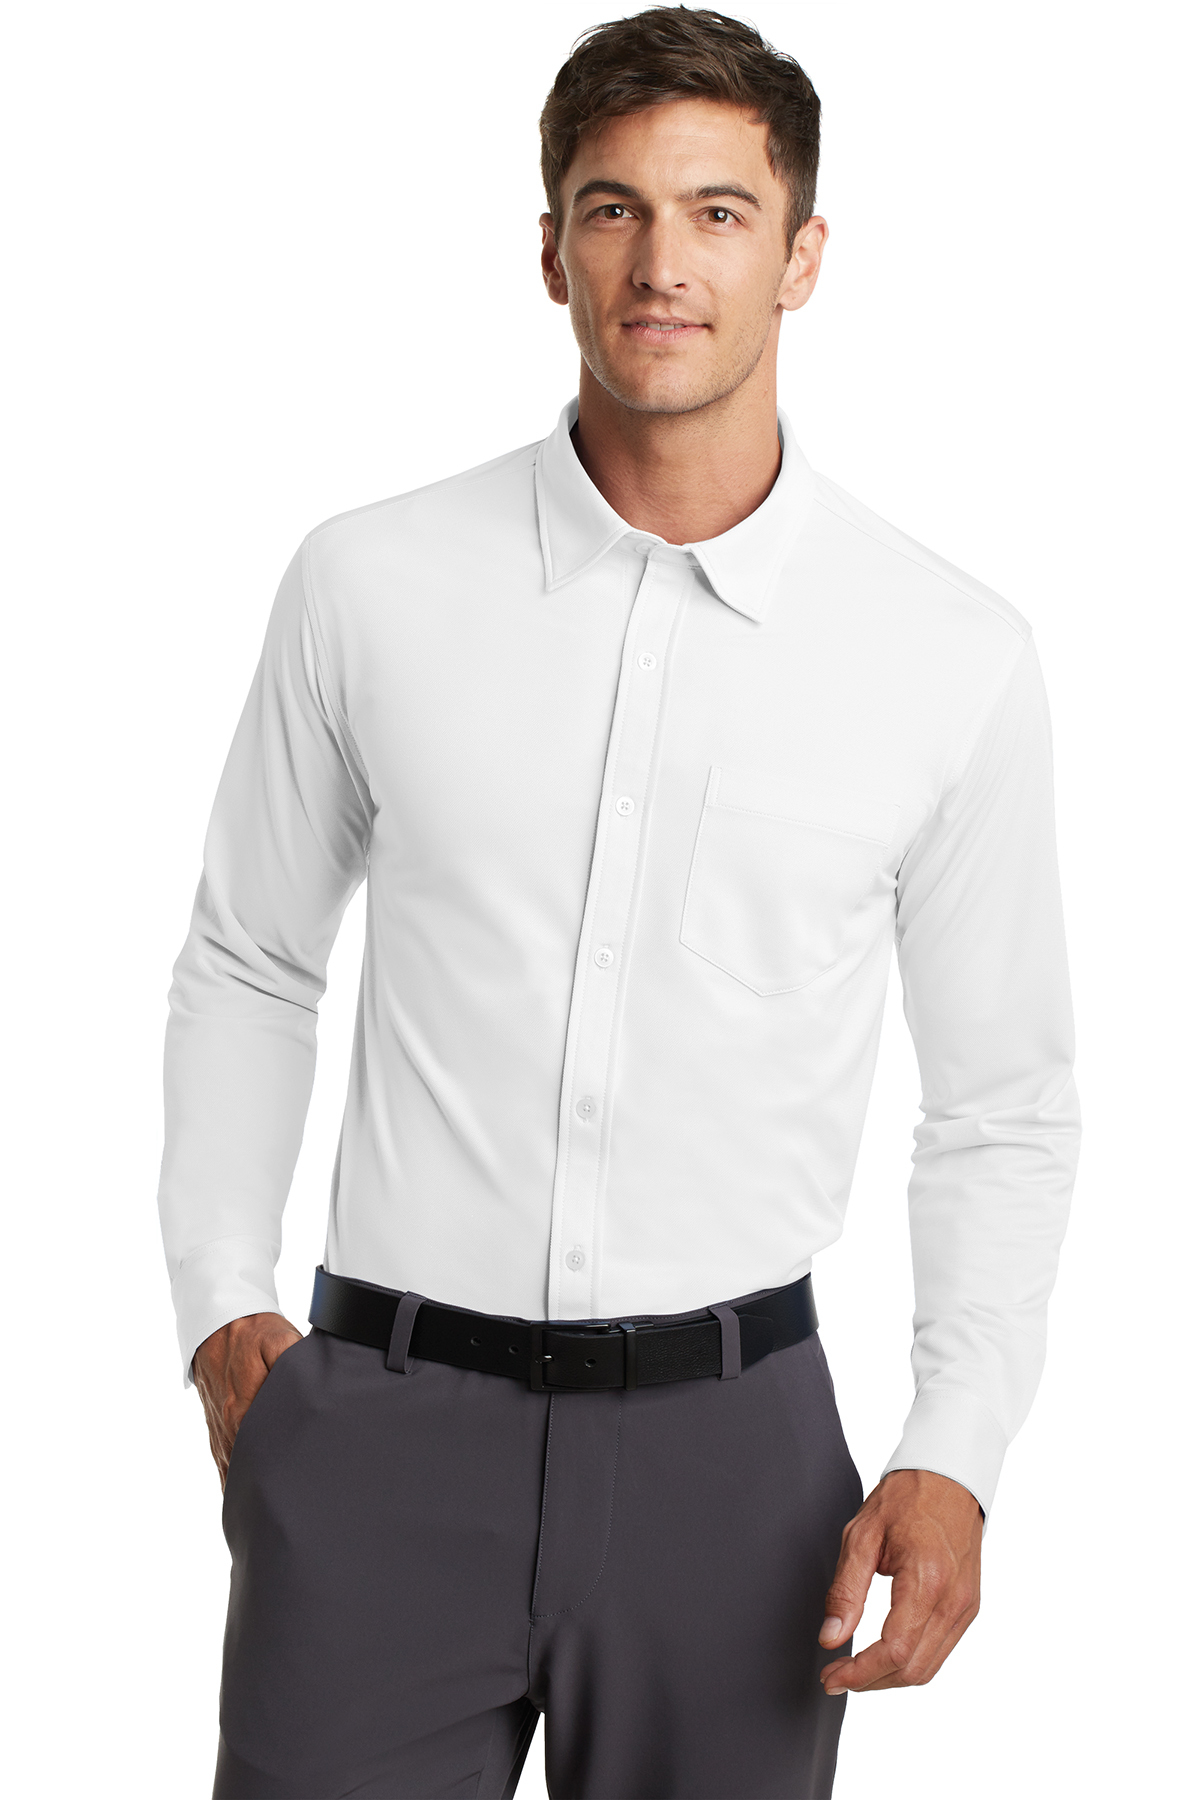 Port Authority Dimension Knit Dress Shirt | Product | Company Casuals